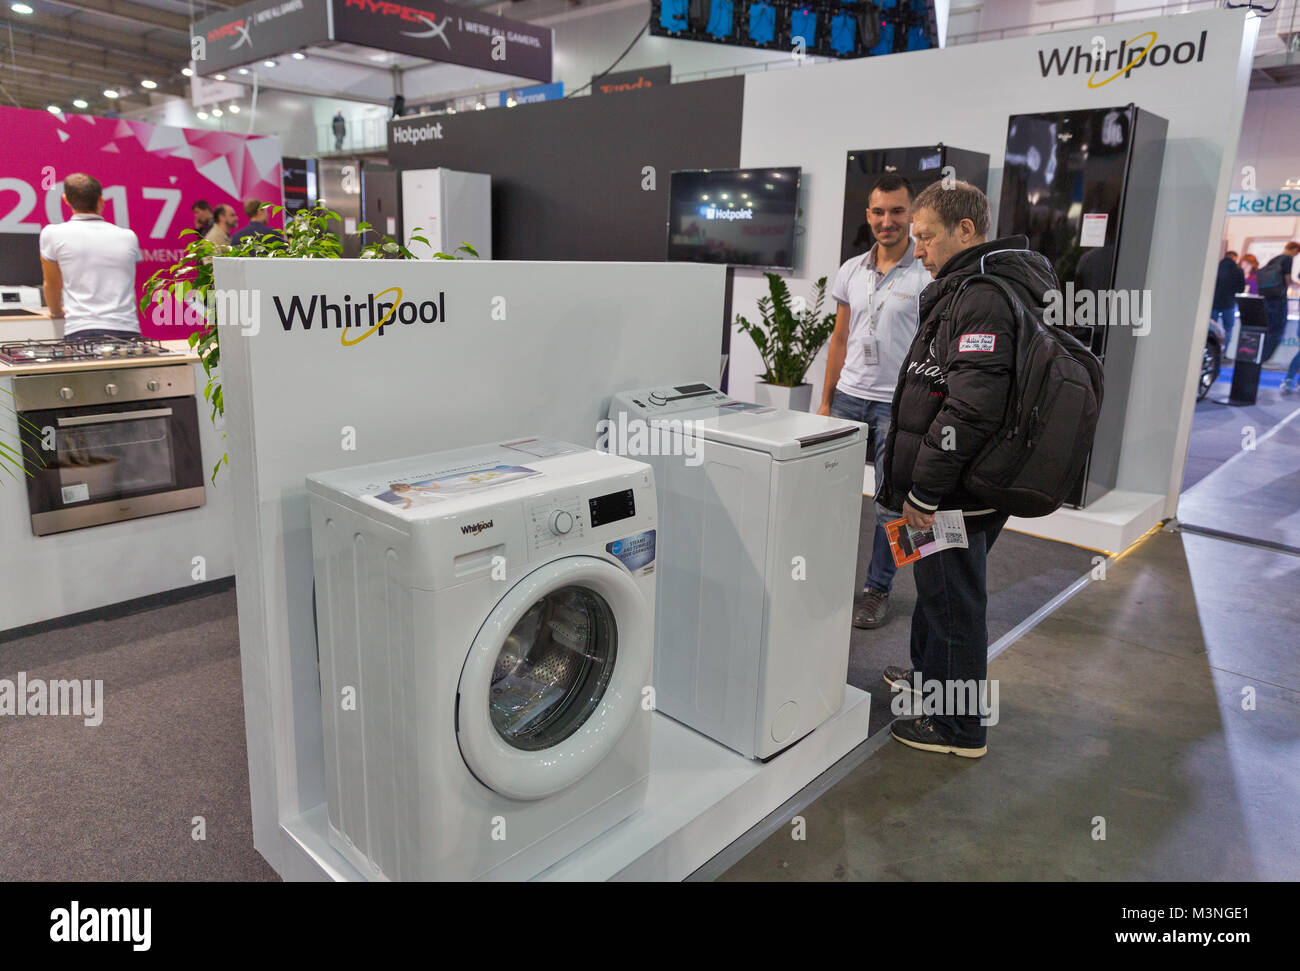 KIEV, UKRAINE - OCTOBER 07, 2017: People visit Whirlpool, American multinational manufacturer of home appliances booth during CEE 2017, largest electr Stock Photo